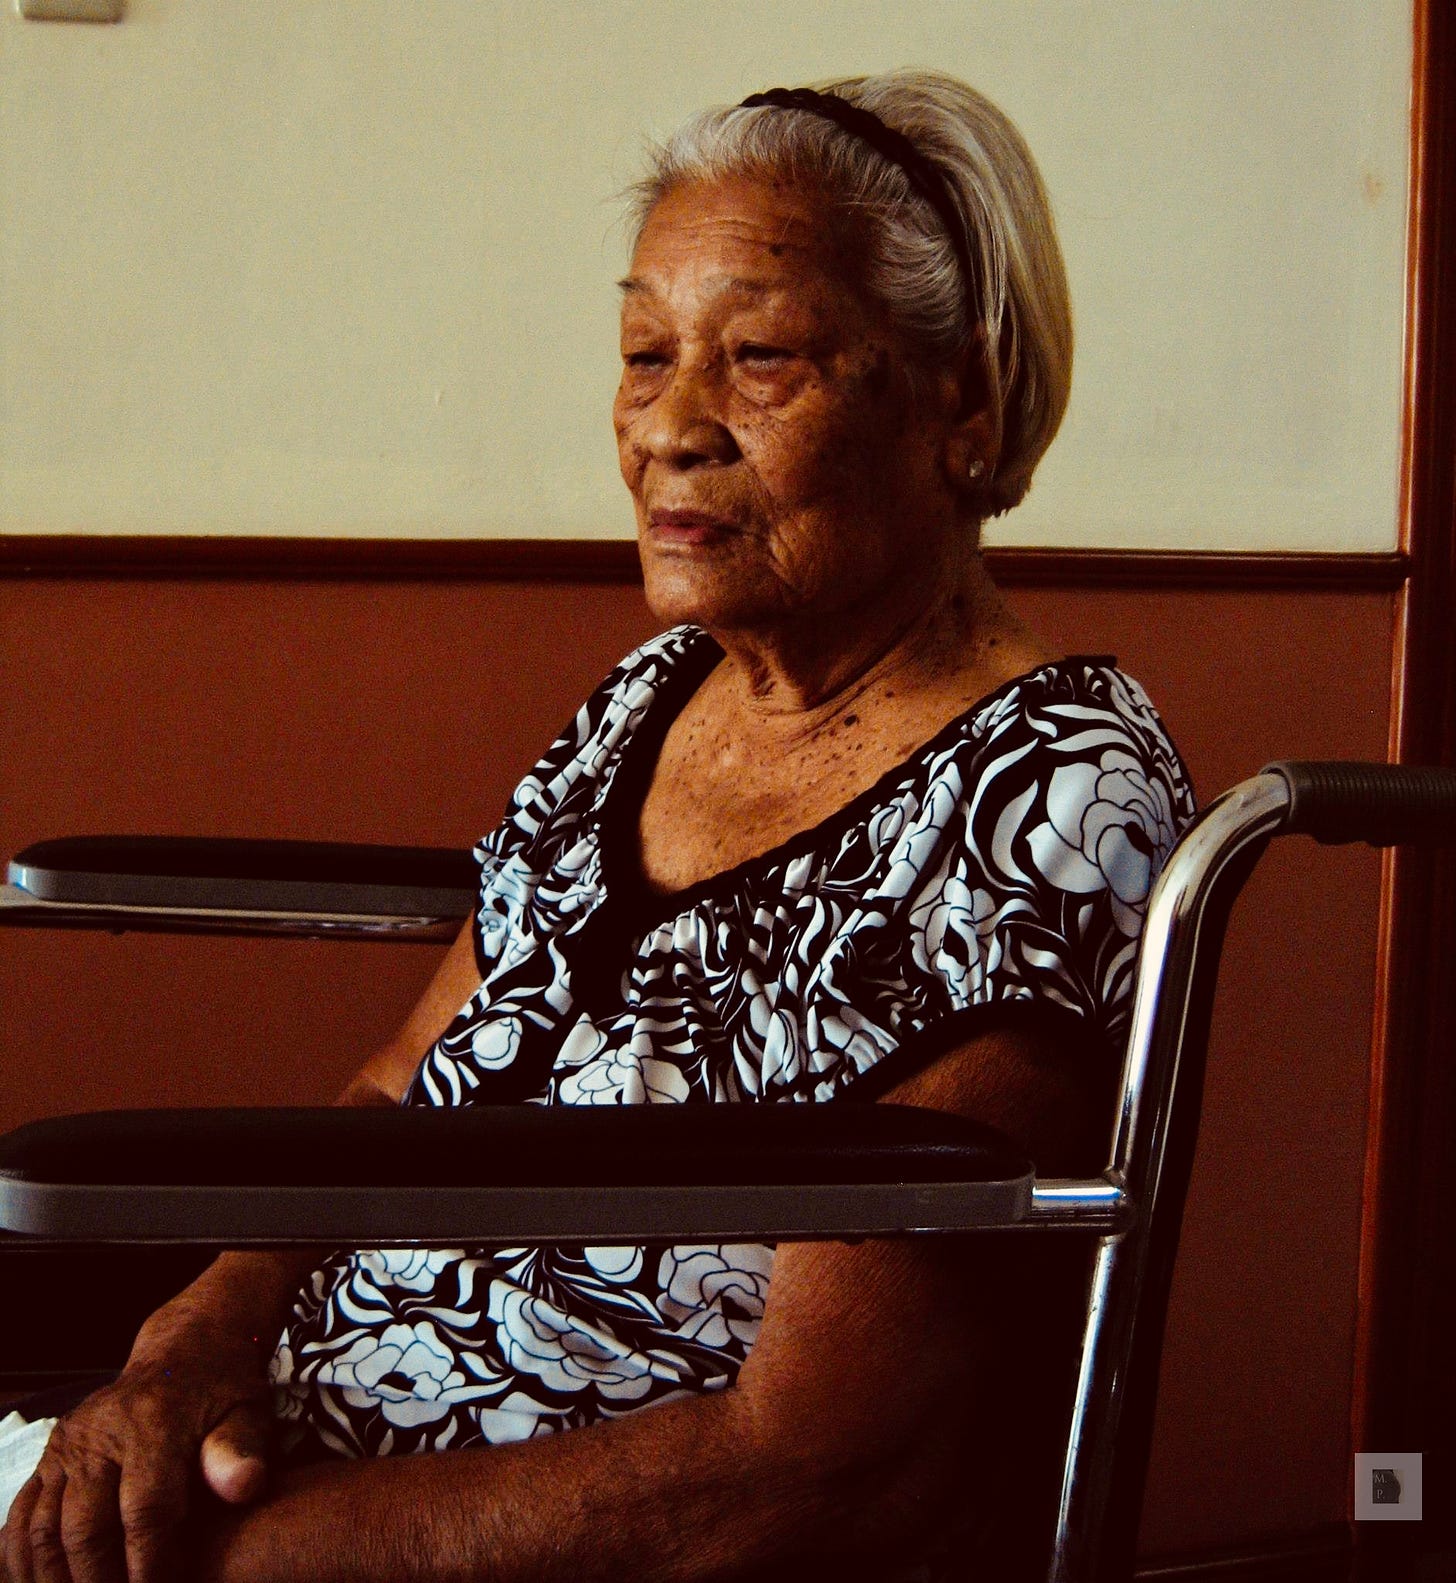 The poet's mother in repose, and the photo is entitled, "Mom in Repose," it features a very old, wrinkly woman with gray, thin hair in a meditative posture. She has a slight smile on her face. The picture is very warm. This is a picture of the author's mother when she was getting out of the hospital in Manila in 2014. 